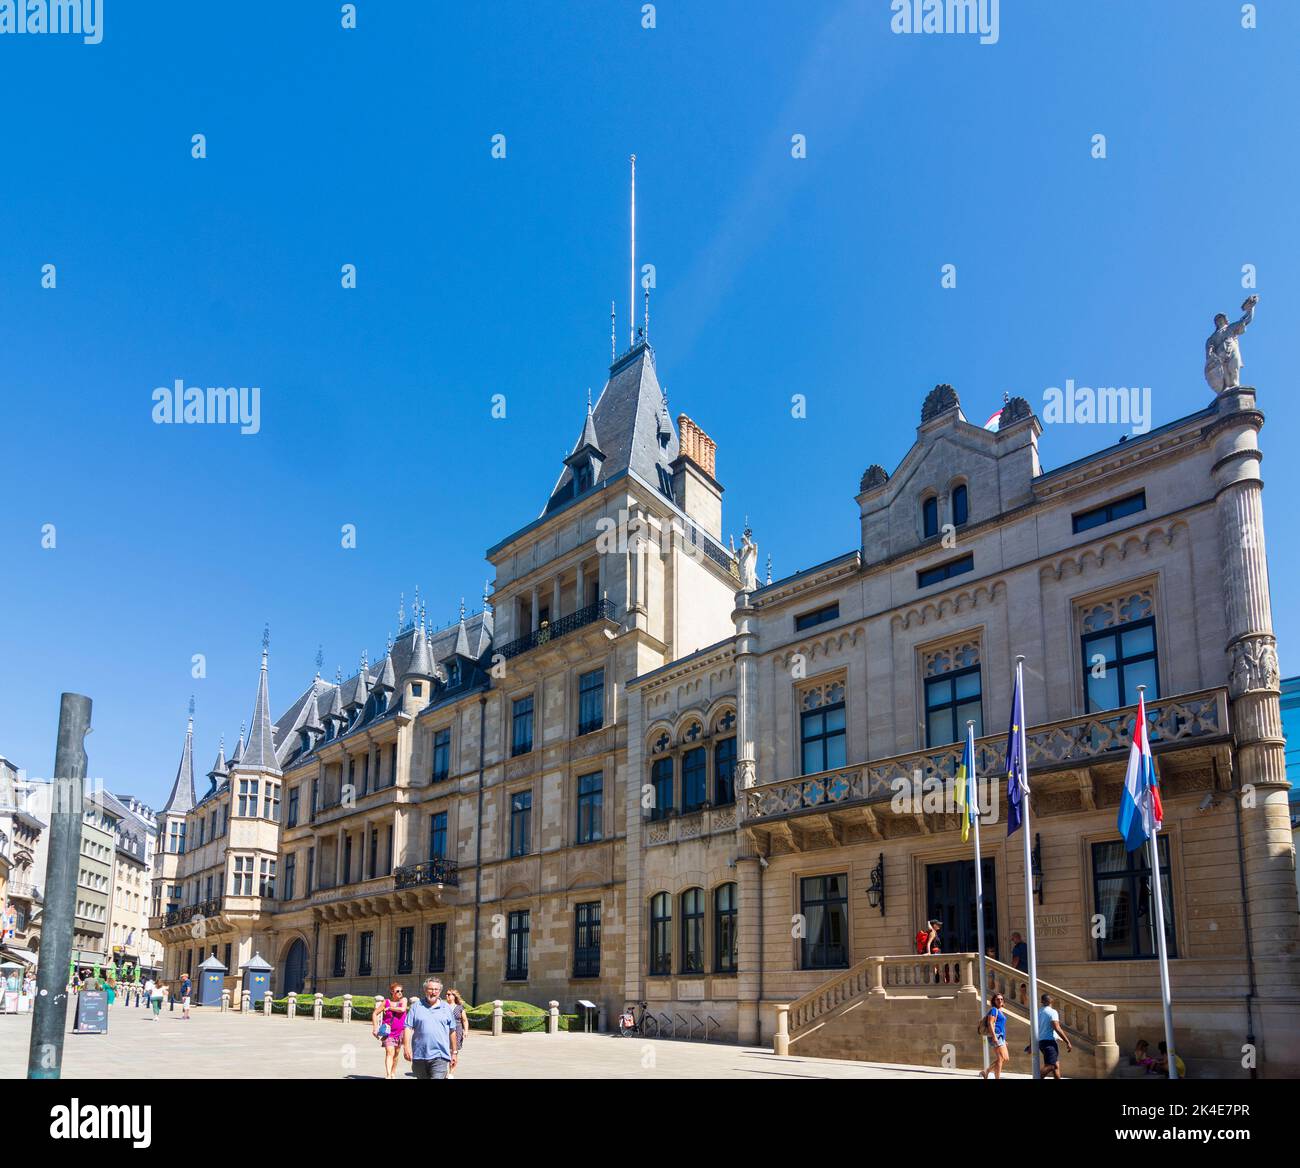 Luxembourg City (Lëtzebuerg; Luxemburg): Grand Ducal Palace in old town, Luxembourg Stock Photo